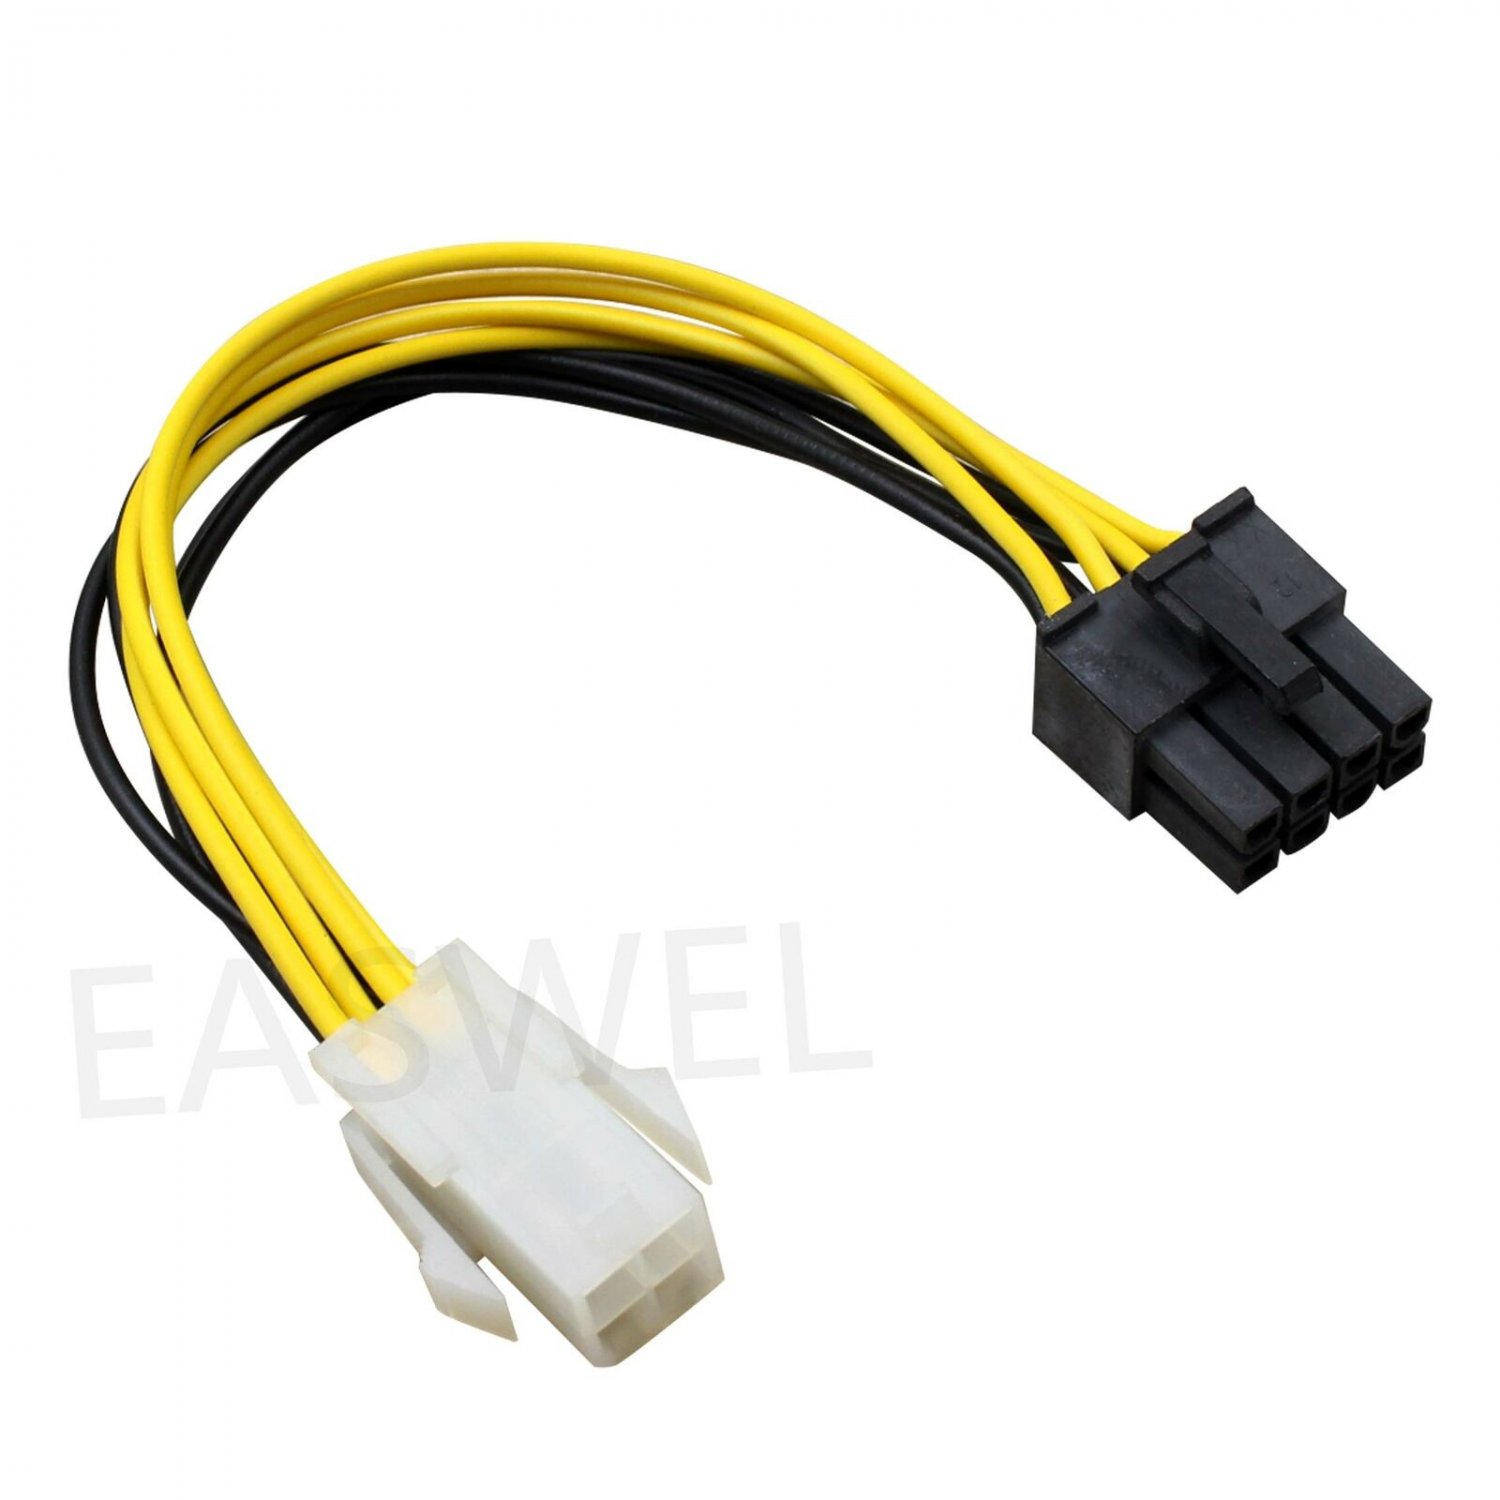 4-Pin to 8-Pin Extension Cable for Power Supply Adapter Converter Cable